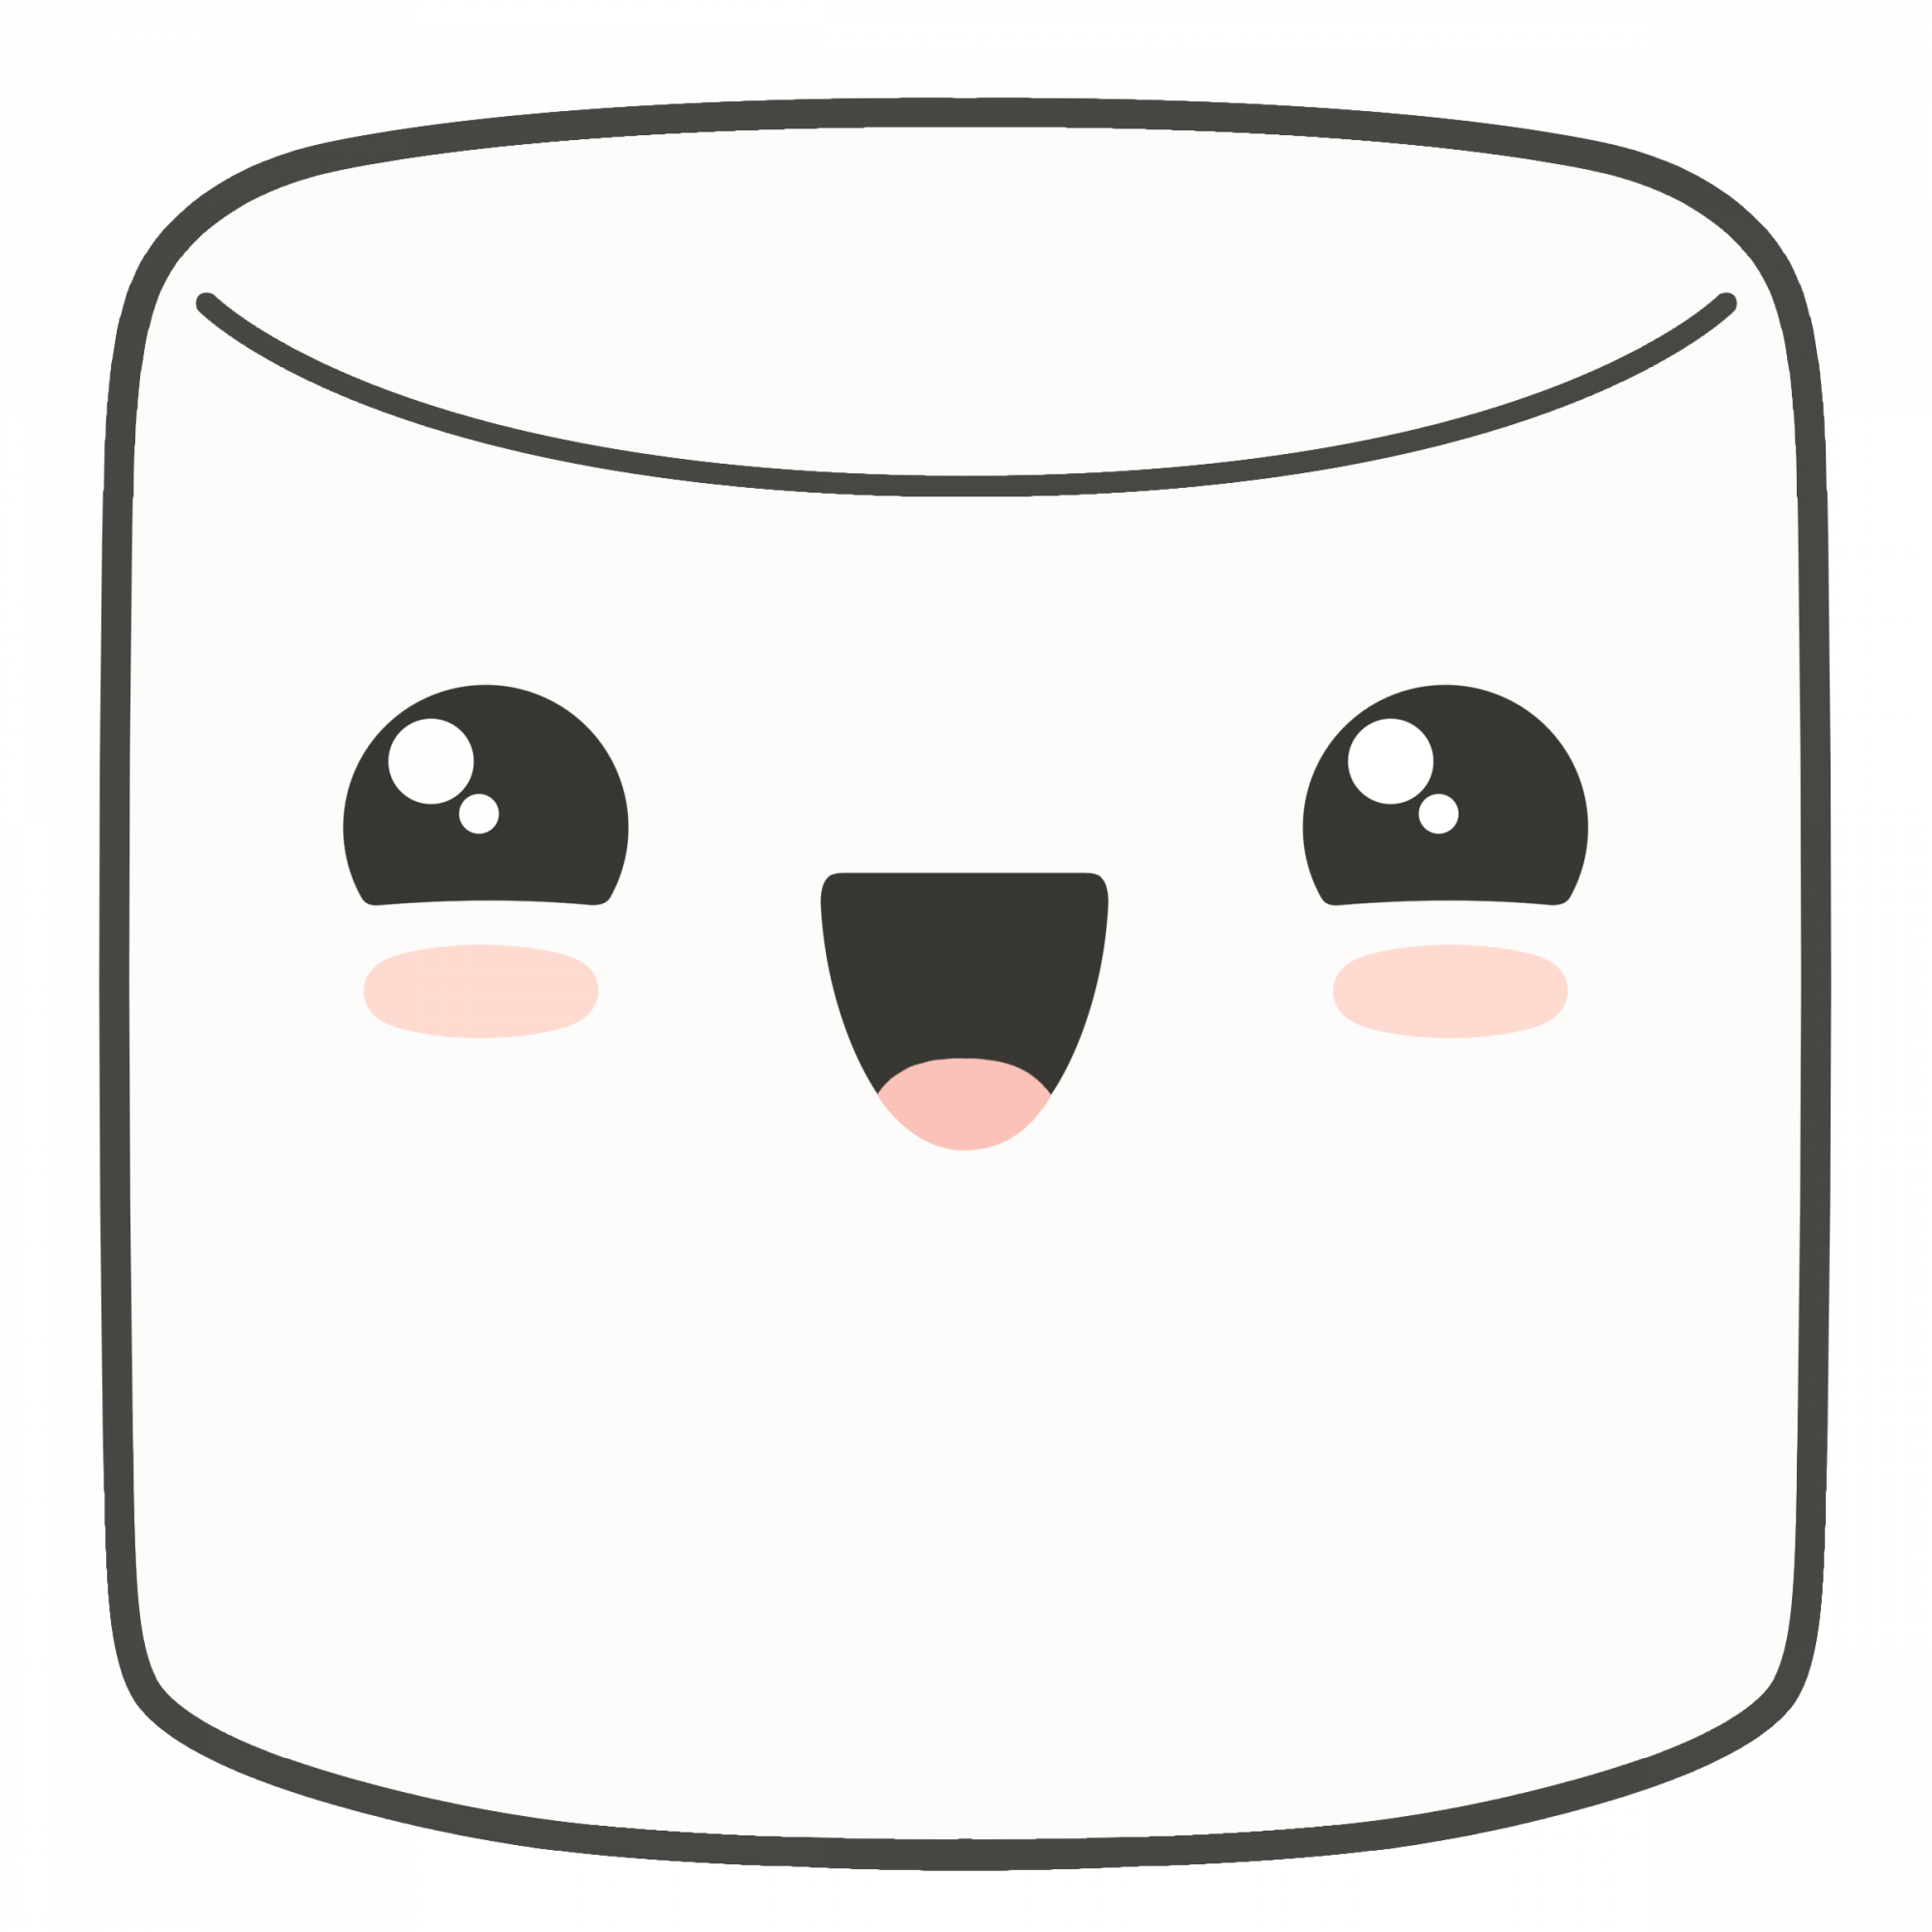 Download Excited Marshmallow - Sad Marshmallow PNG Image with No ...